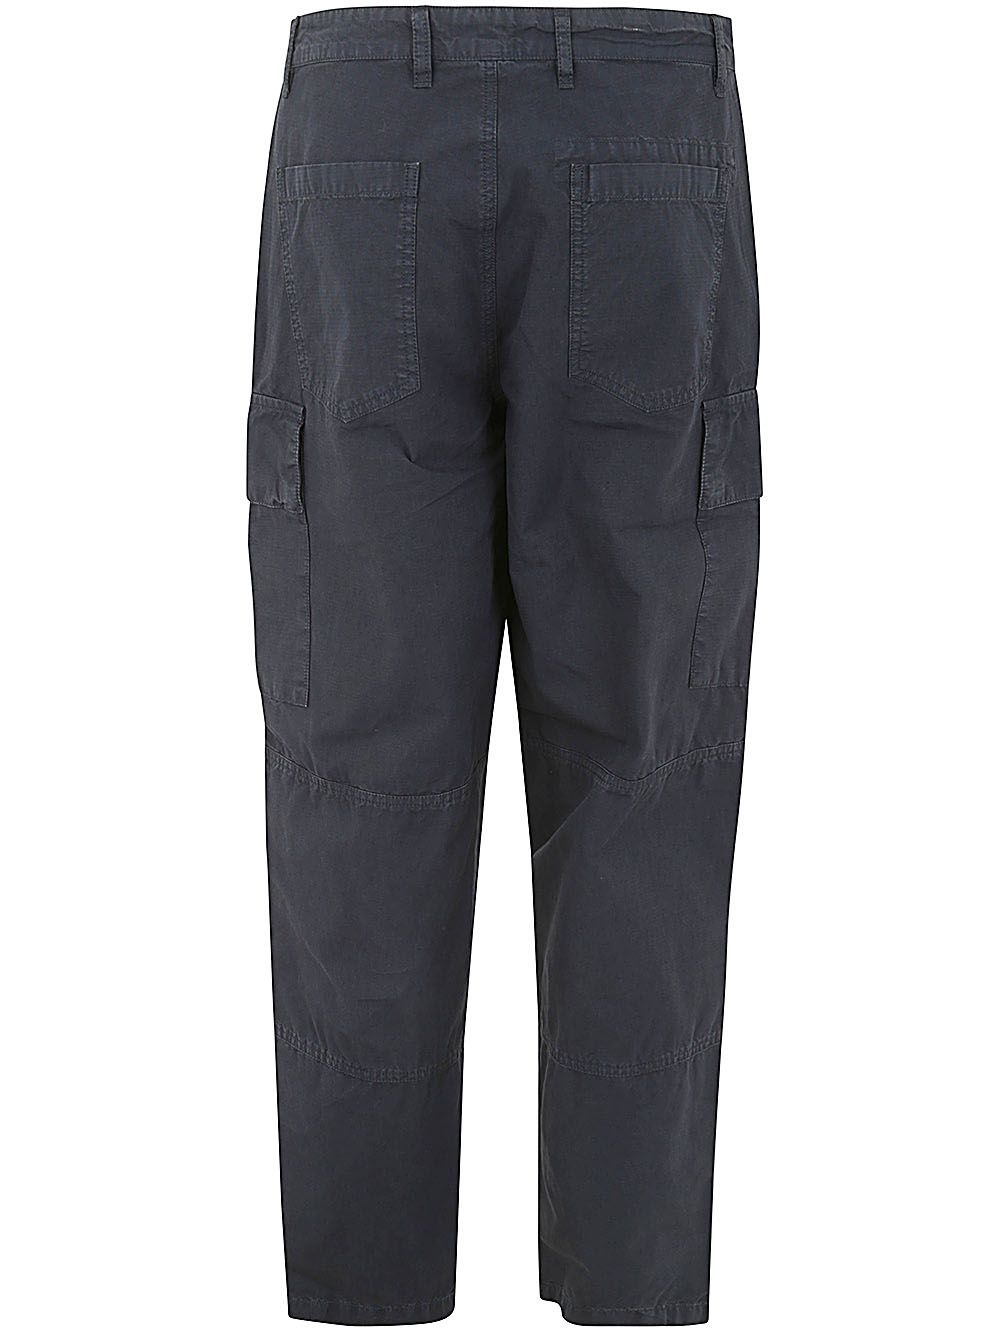 ESSENTIAL RIPSTOP CARGO TROUSERS - 2